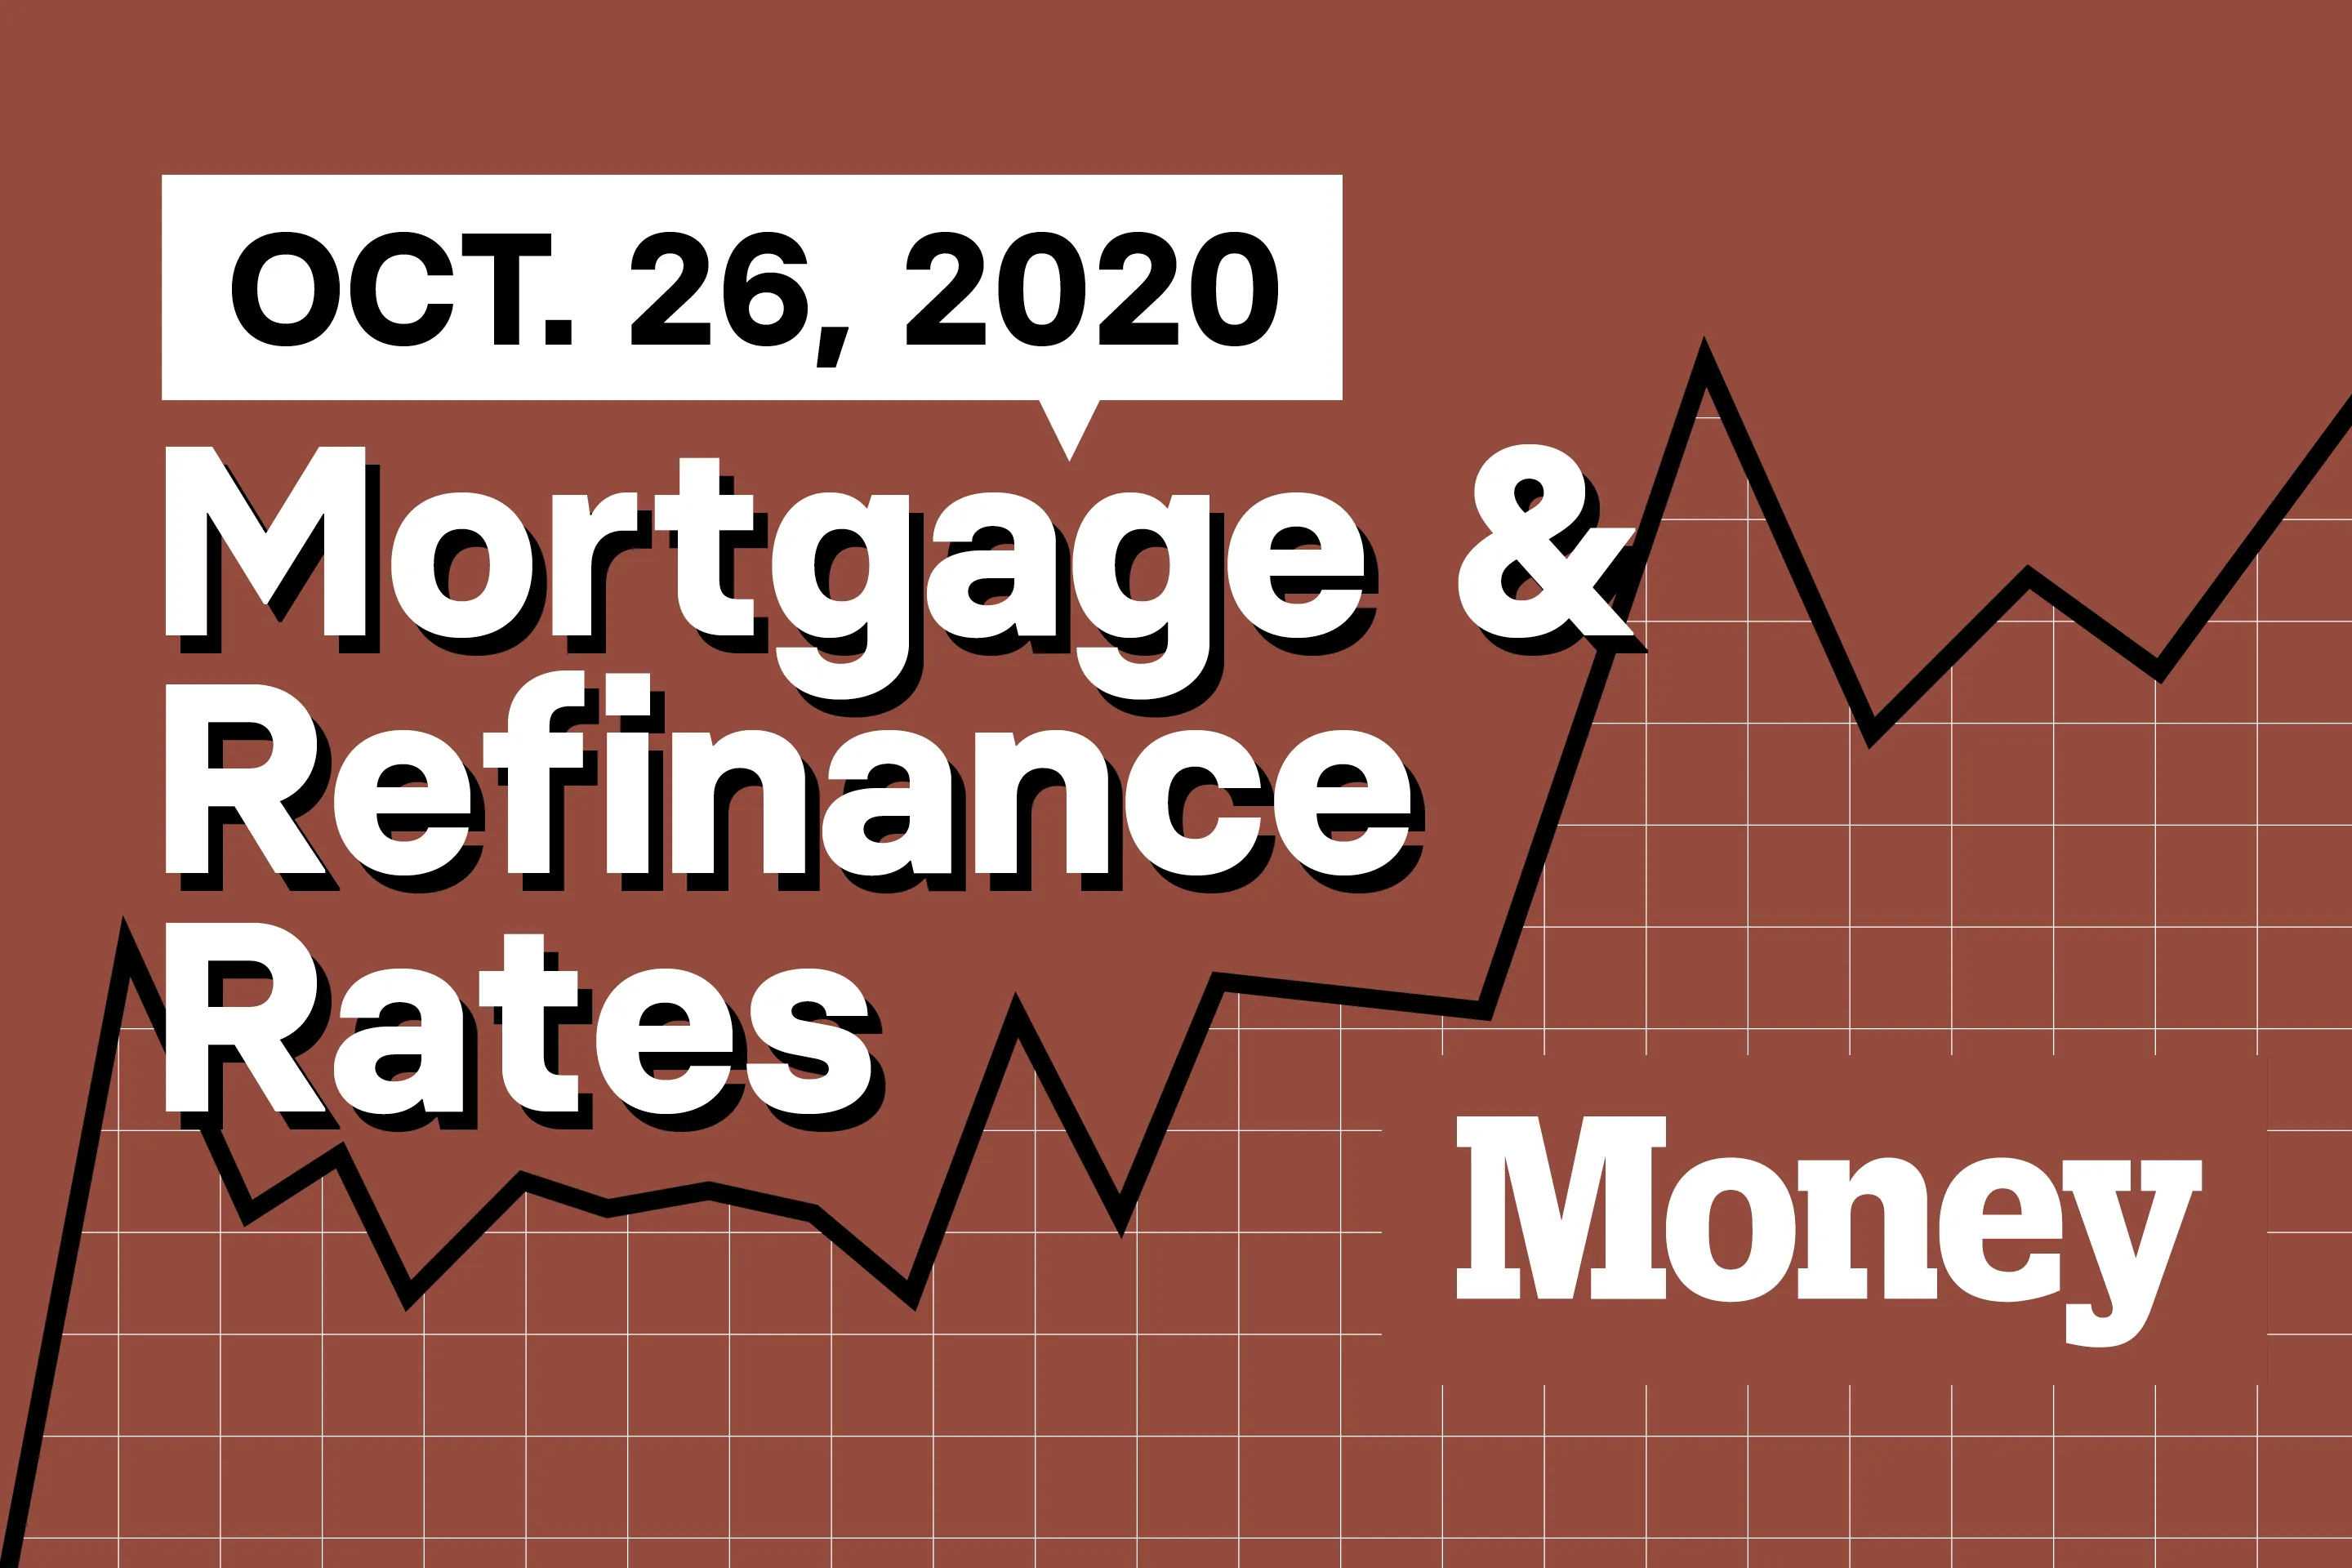 Here Are Today's Best Mortgage & Refinance Rates for October 26, 2020